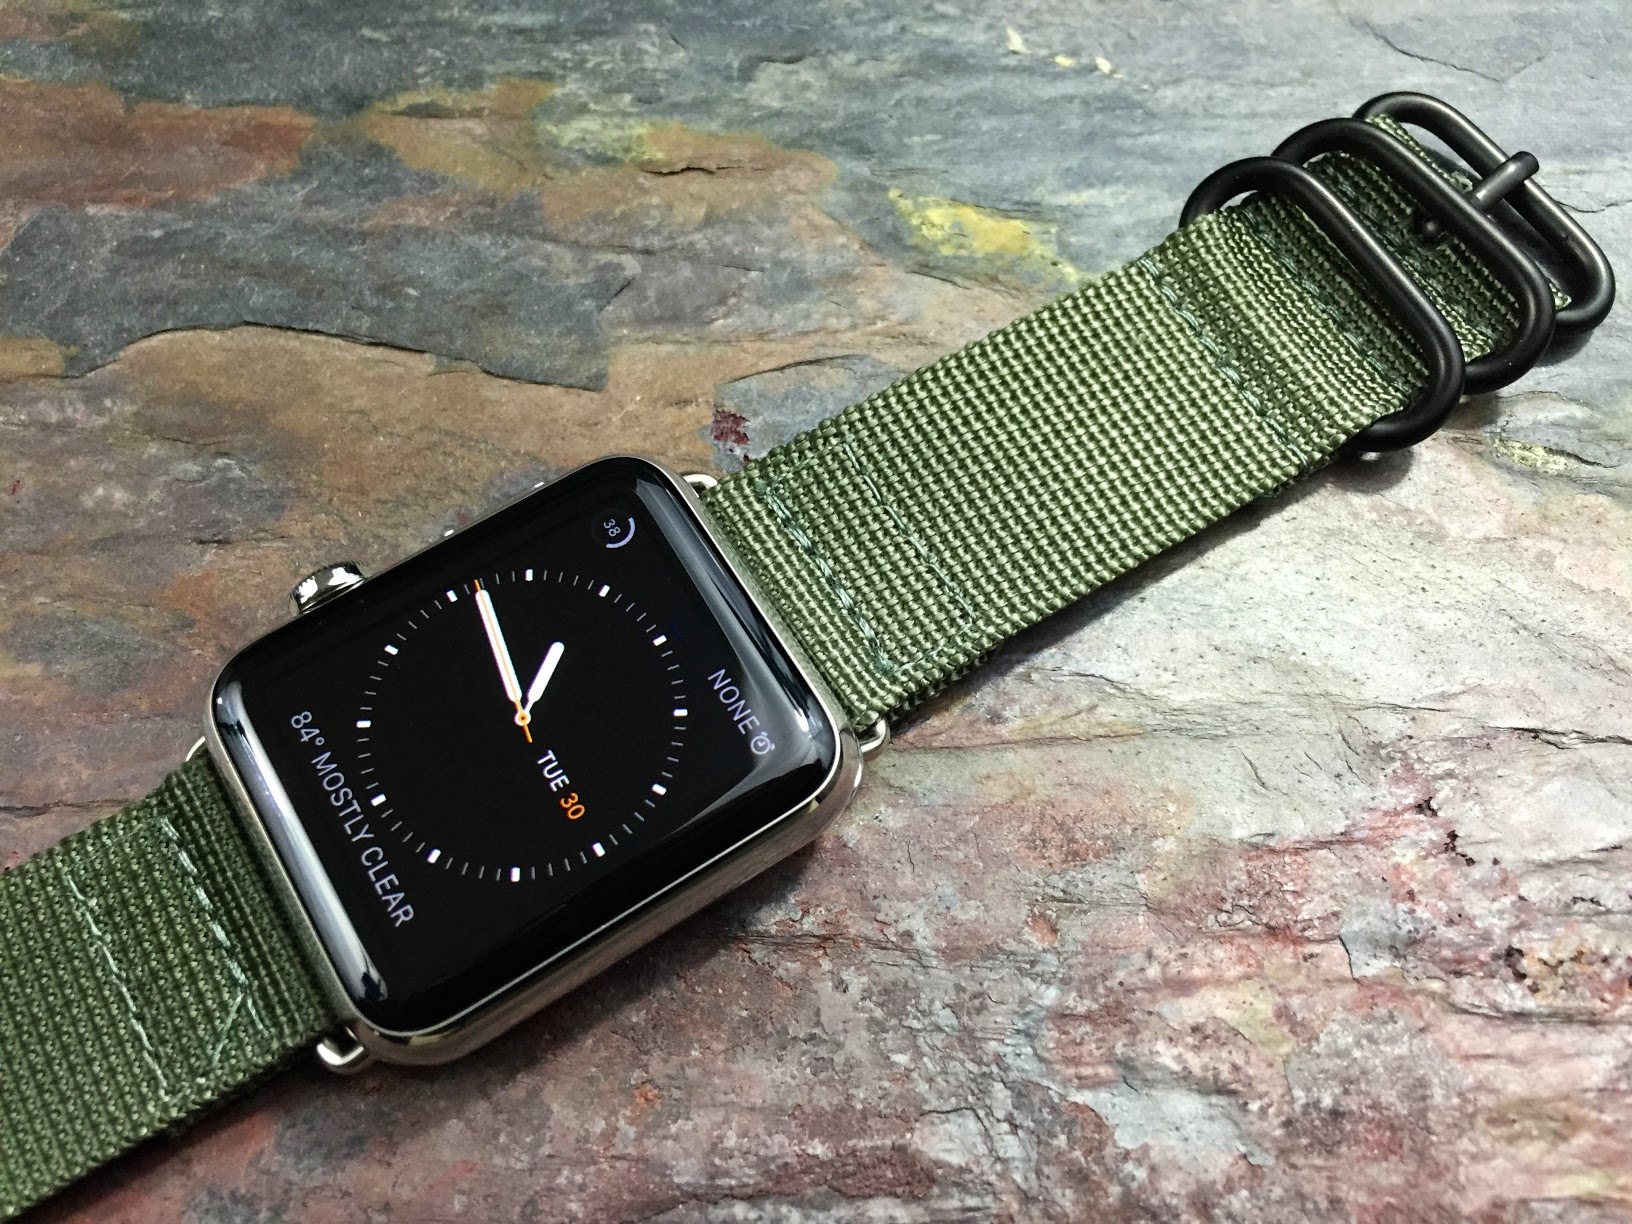 Apple Watch 2 Rumored to Include Cellular Connectivity